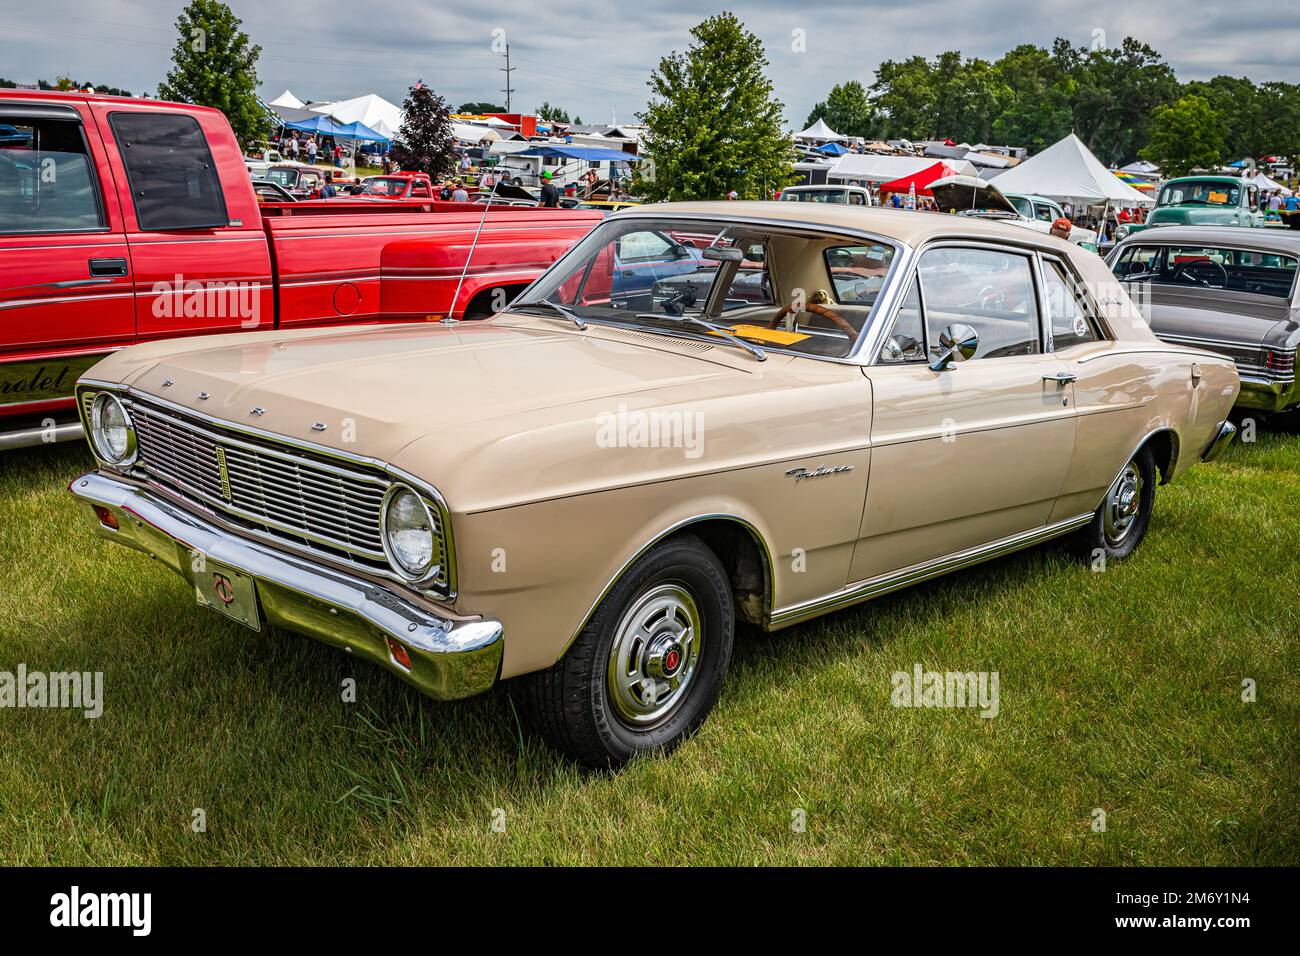 Iola, WI - July 07, 2022: High perspective front corner view of a 1966 Ford Falcon Futura Sports Coupe at a local car show. Stock Photo